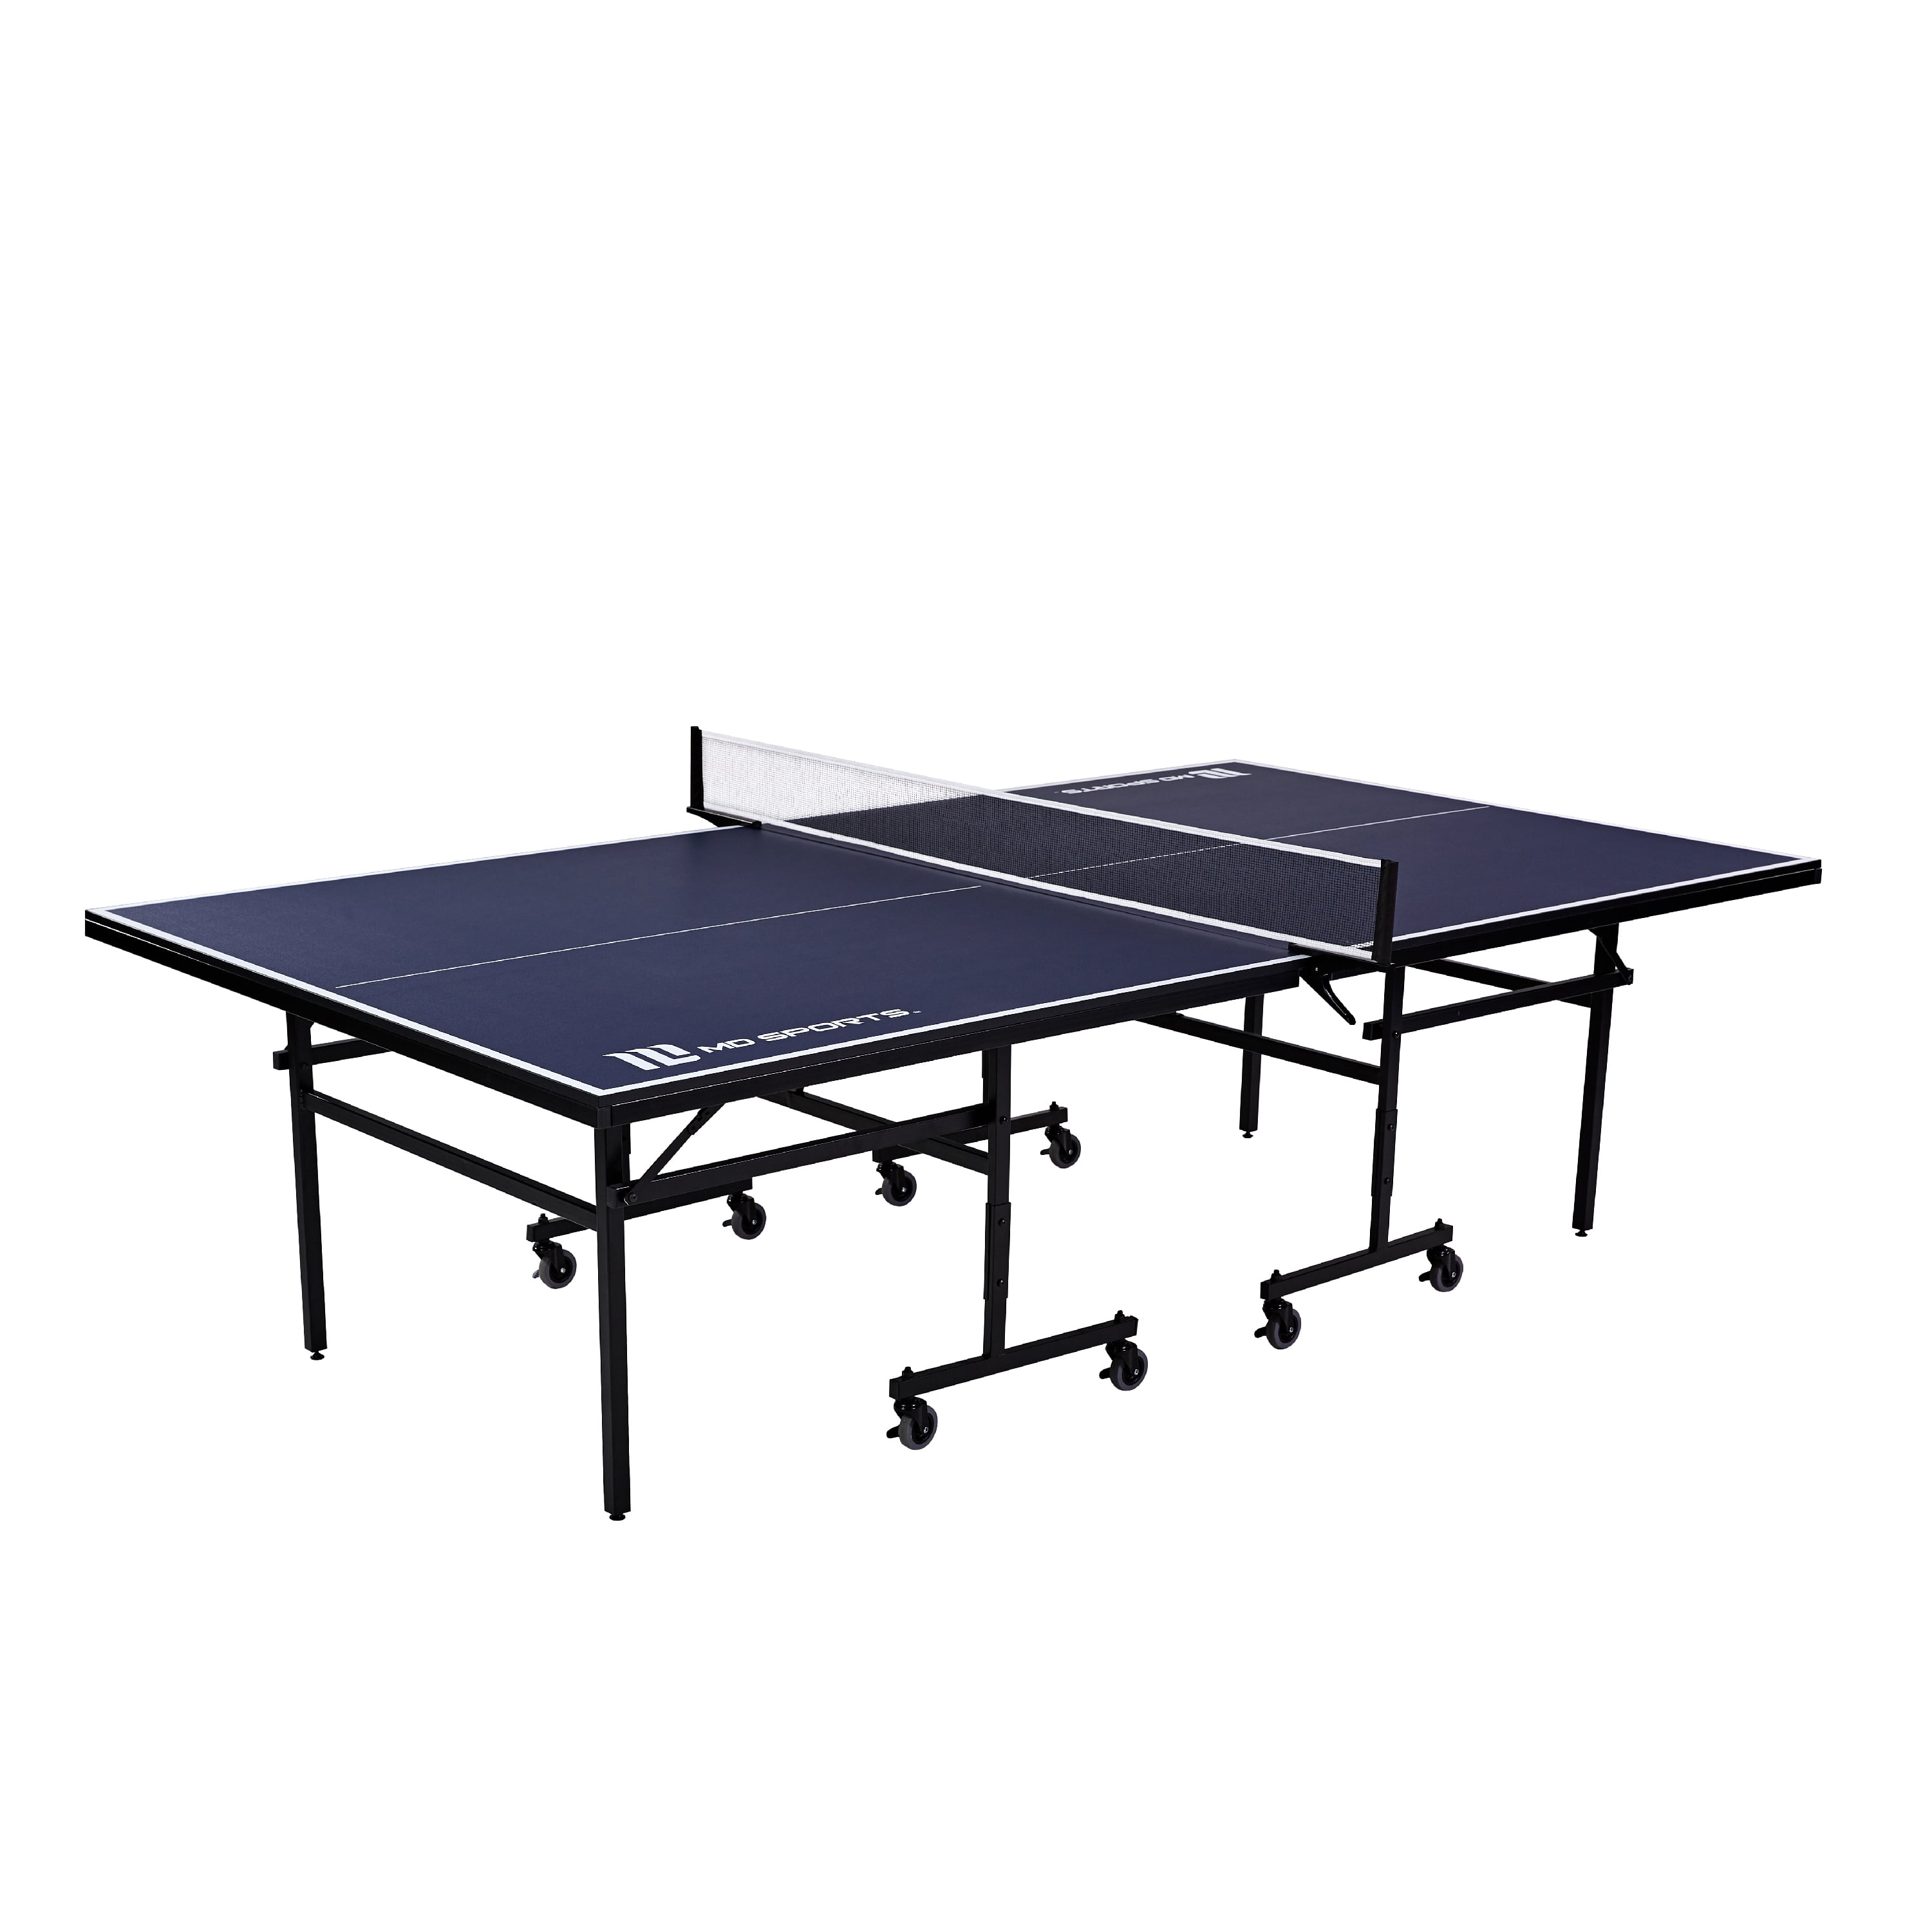 MD Sports Official Size Table Tennis Table Black/Blue/White 